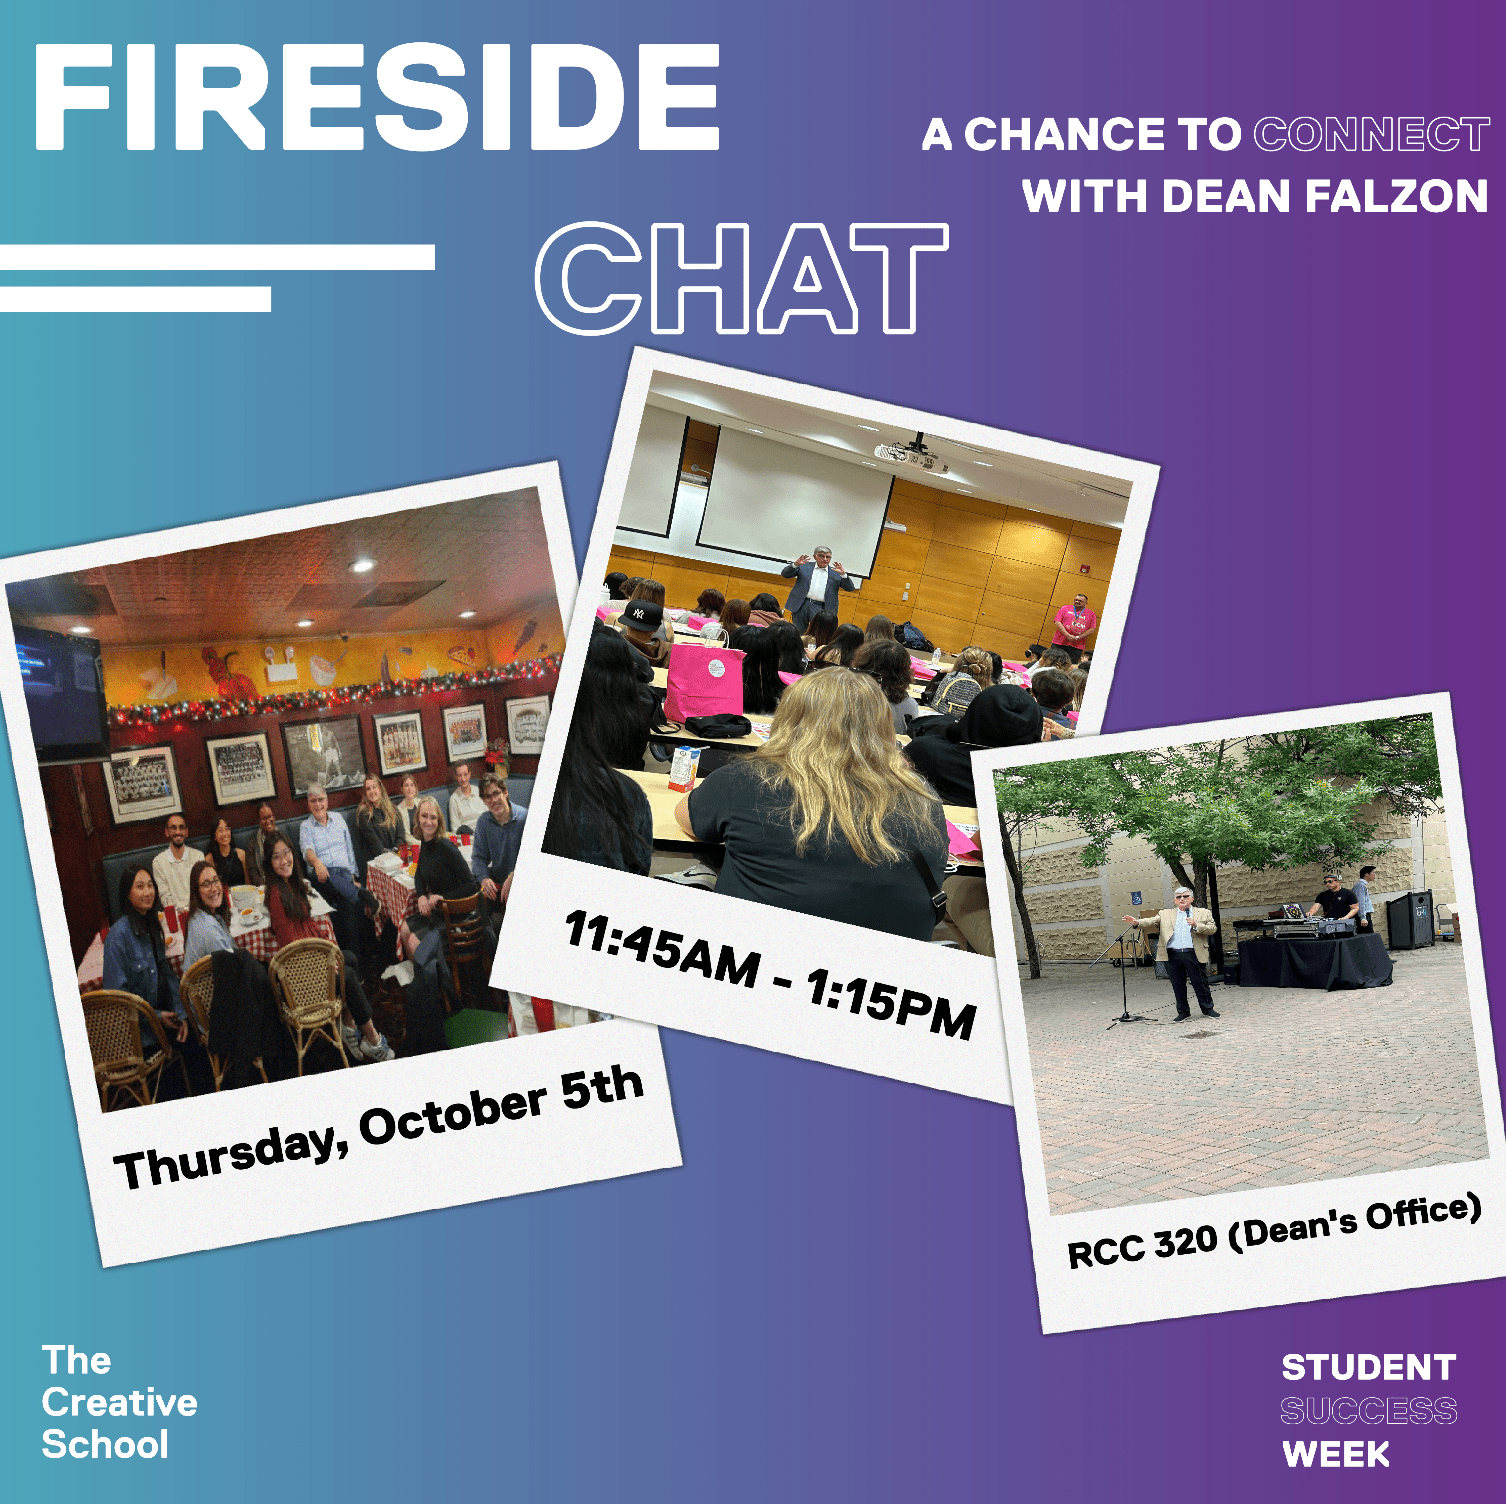 Fireside Chat with Dean Falzon